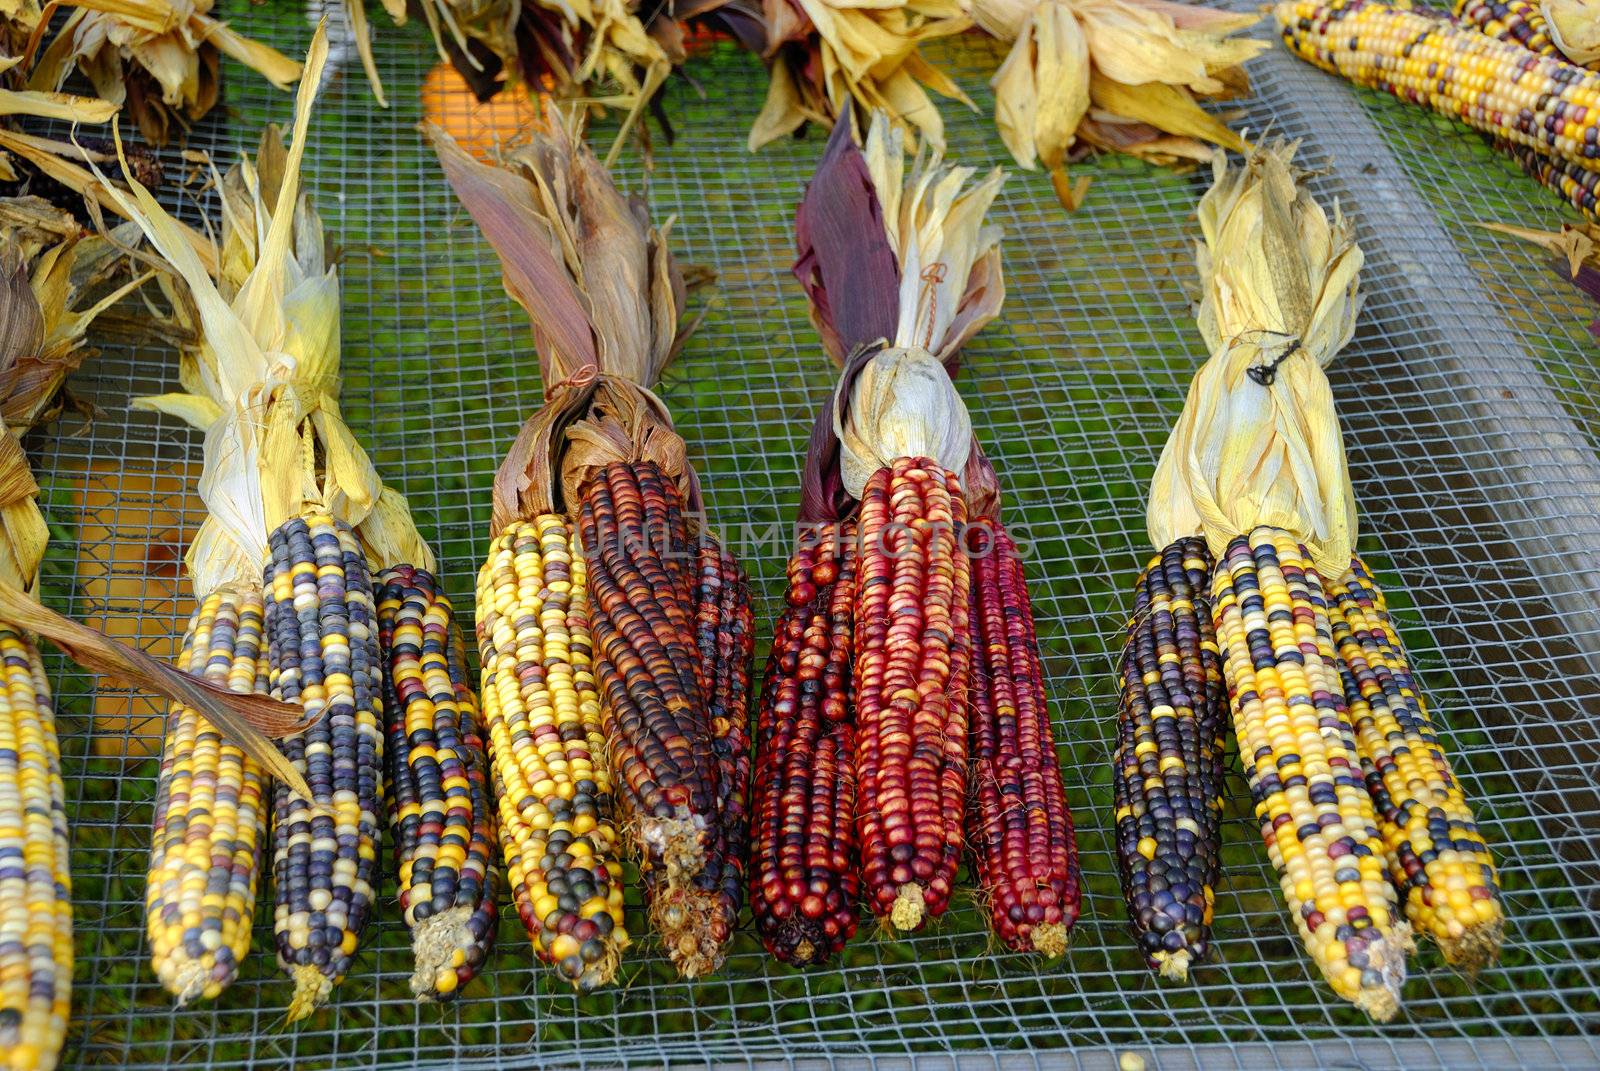 Freshly harvested Indian corn arranged for sale at a local market